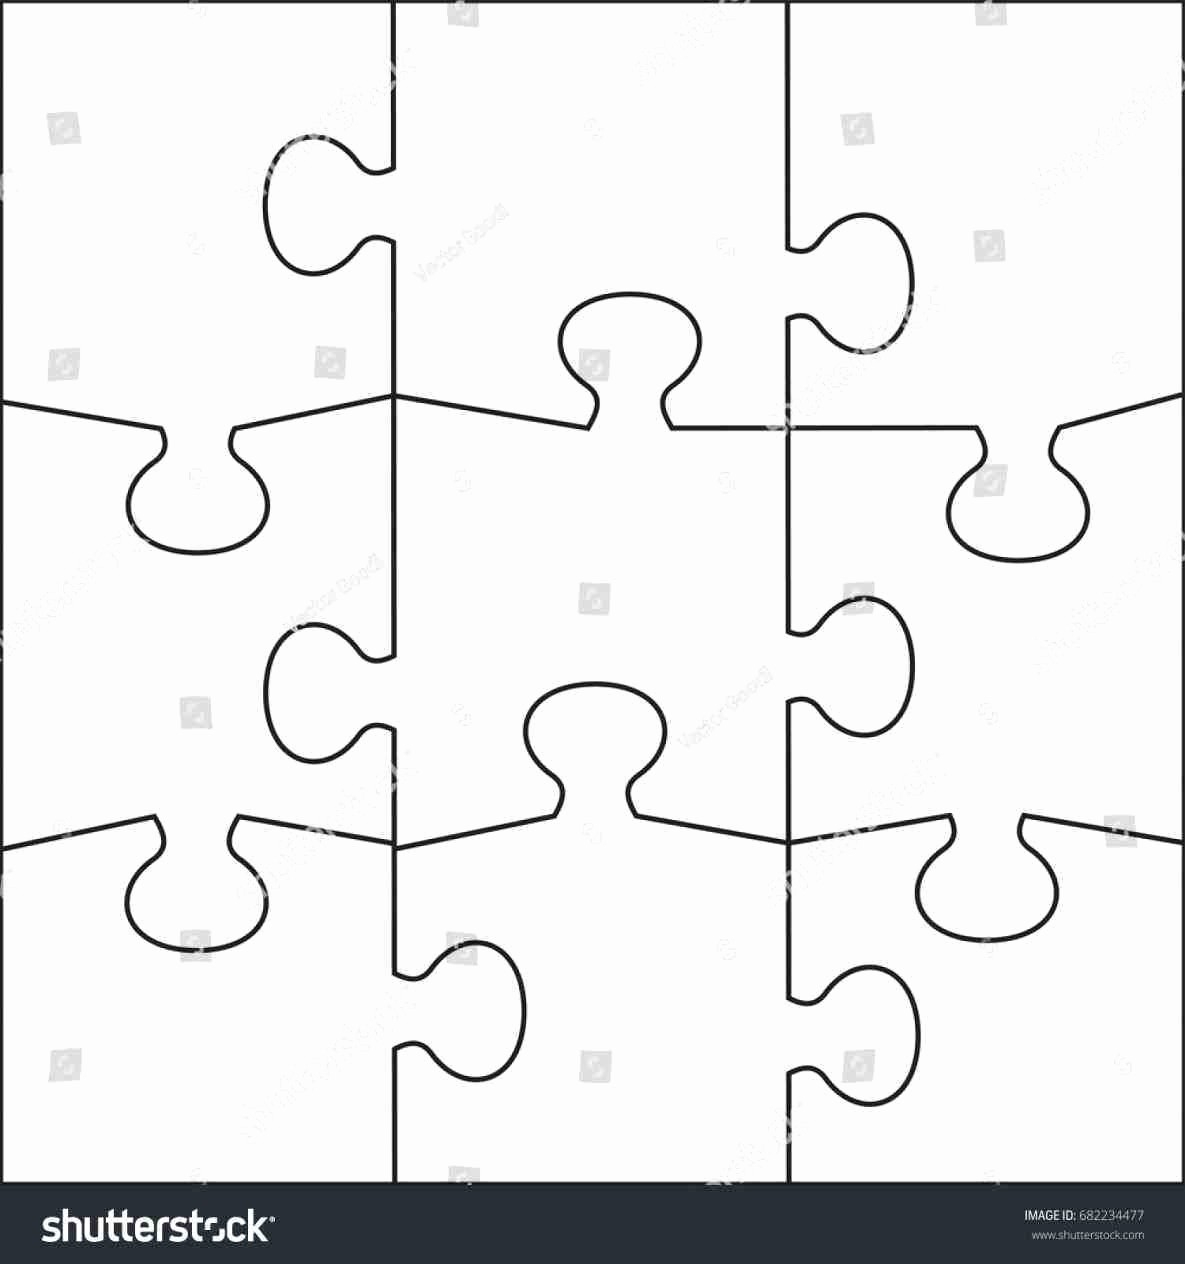 Puzzle Pieces Template For Word Fresh 9 Piece Jigsaw Puzzle Throughout Jigsaw Puzzle Template For Word